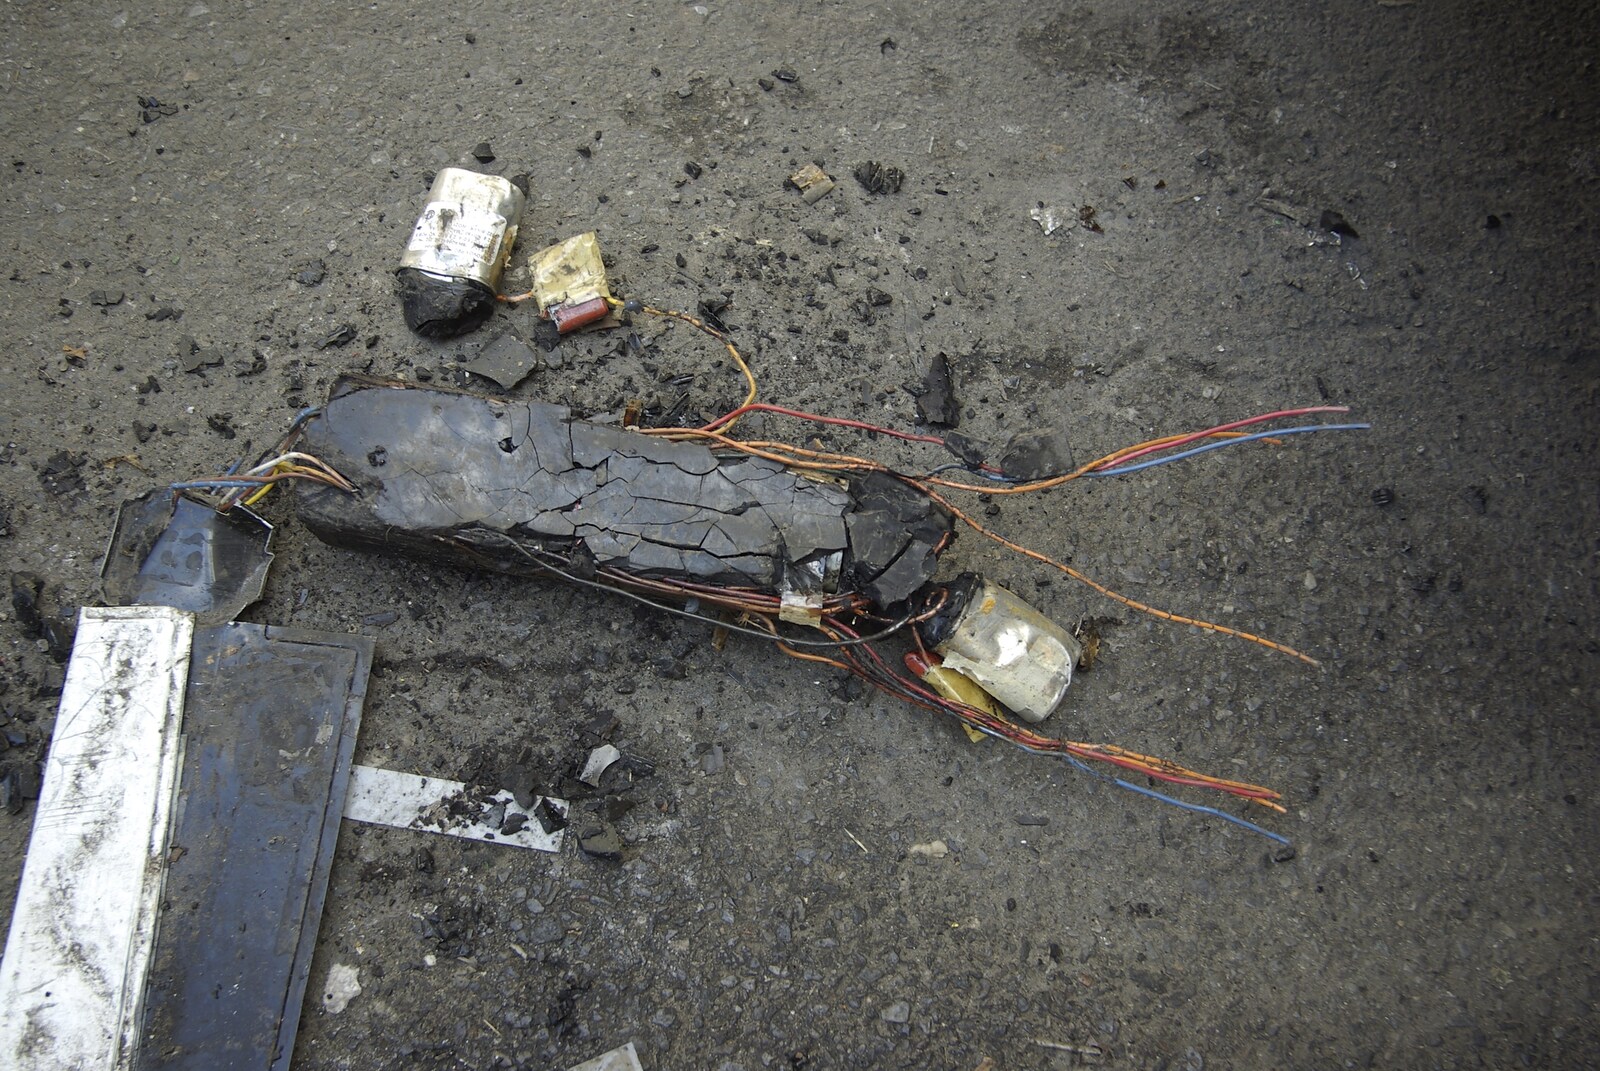 Persian Day Parade, Upper East Side and Midtown, New York, US - 25th March 2007: Some sort of broken electrical gear on the street